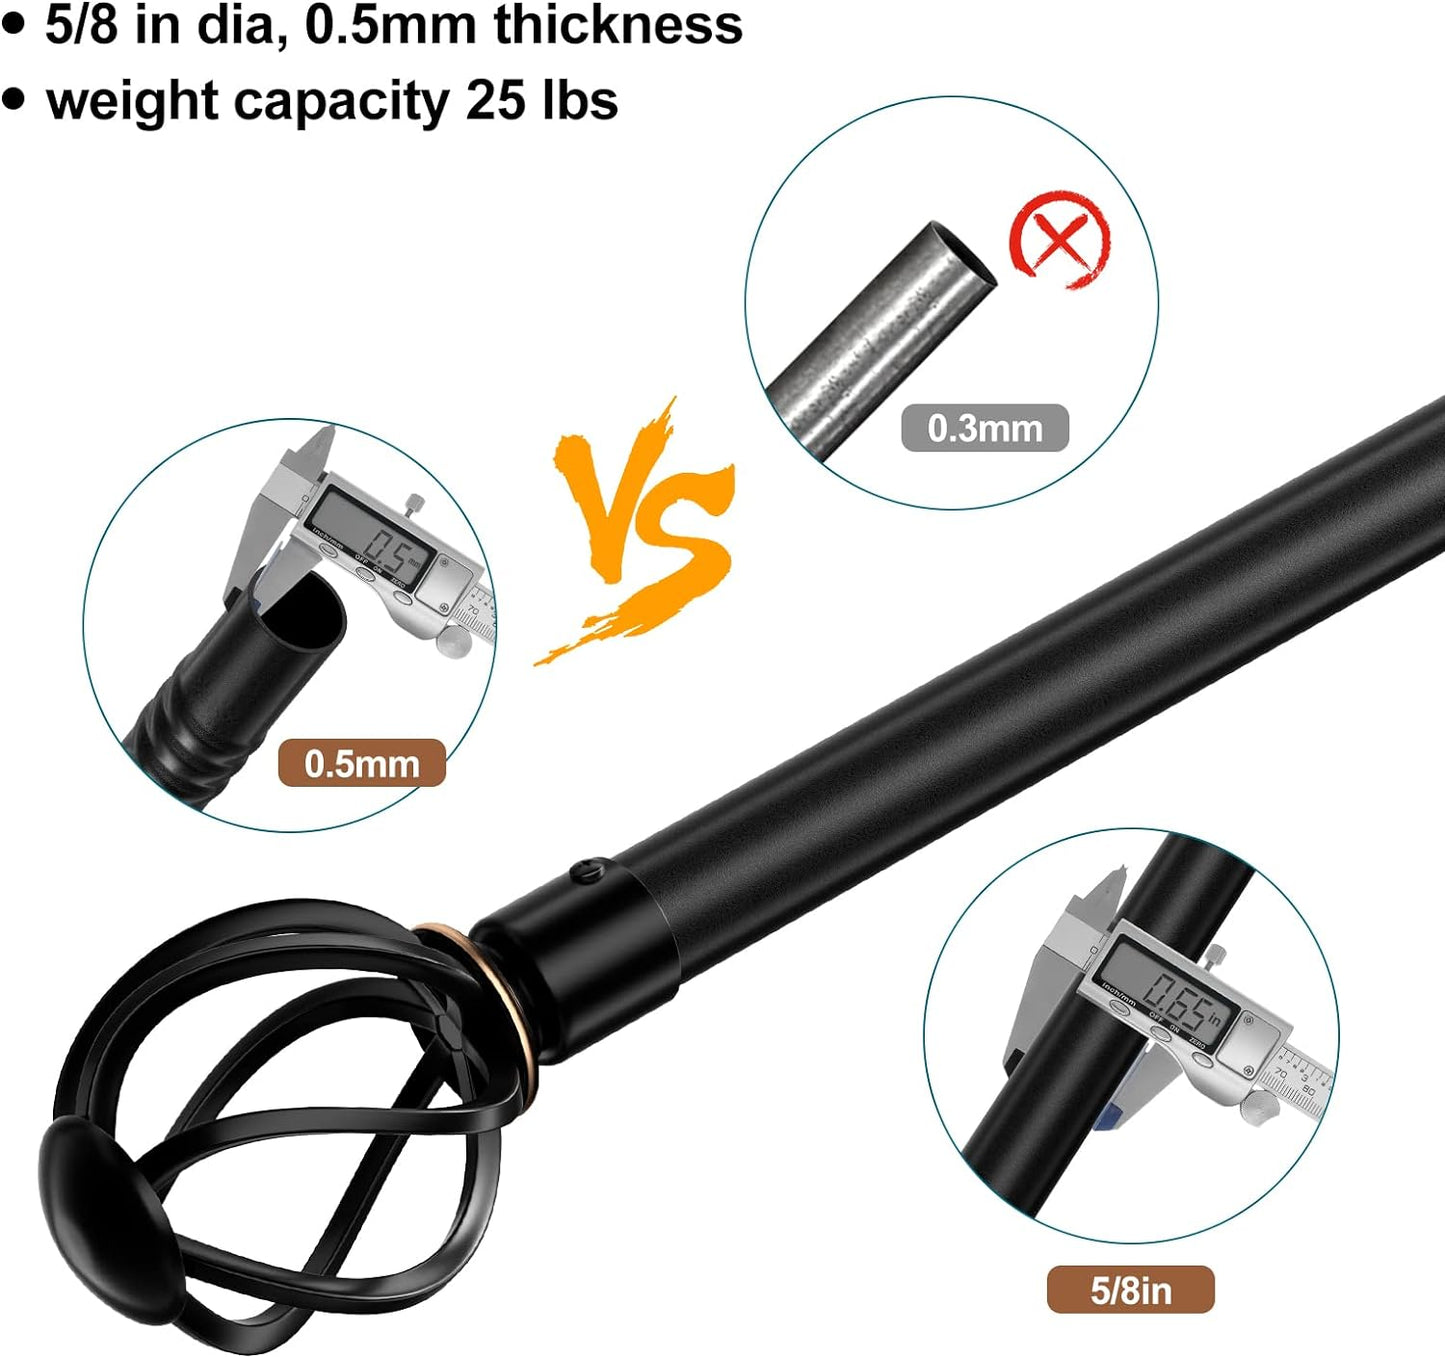 Curtain Rods for Windows 66 to 120 Inch, Heavy Duty Curtain Rod with Cage Finials, Adjustable Decorative Curtain Rods for Outdoor Patio, Sliding Glass Door, 5/8" Diameter - Black  GSBLUNIE   